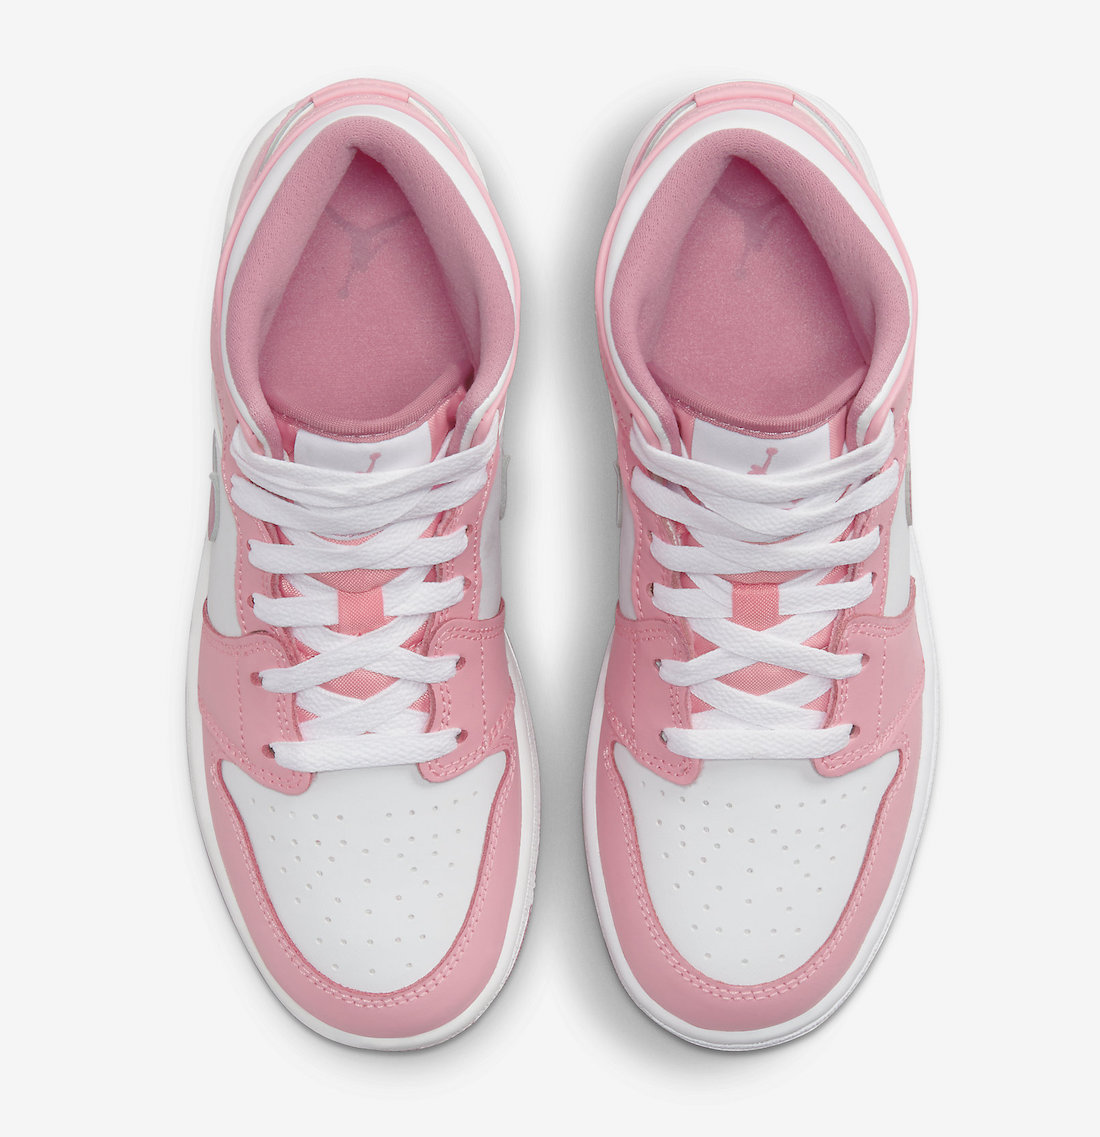 Air Jordan 1 Mid GS Pink White Valentine's Day Release Date + Where to ...